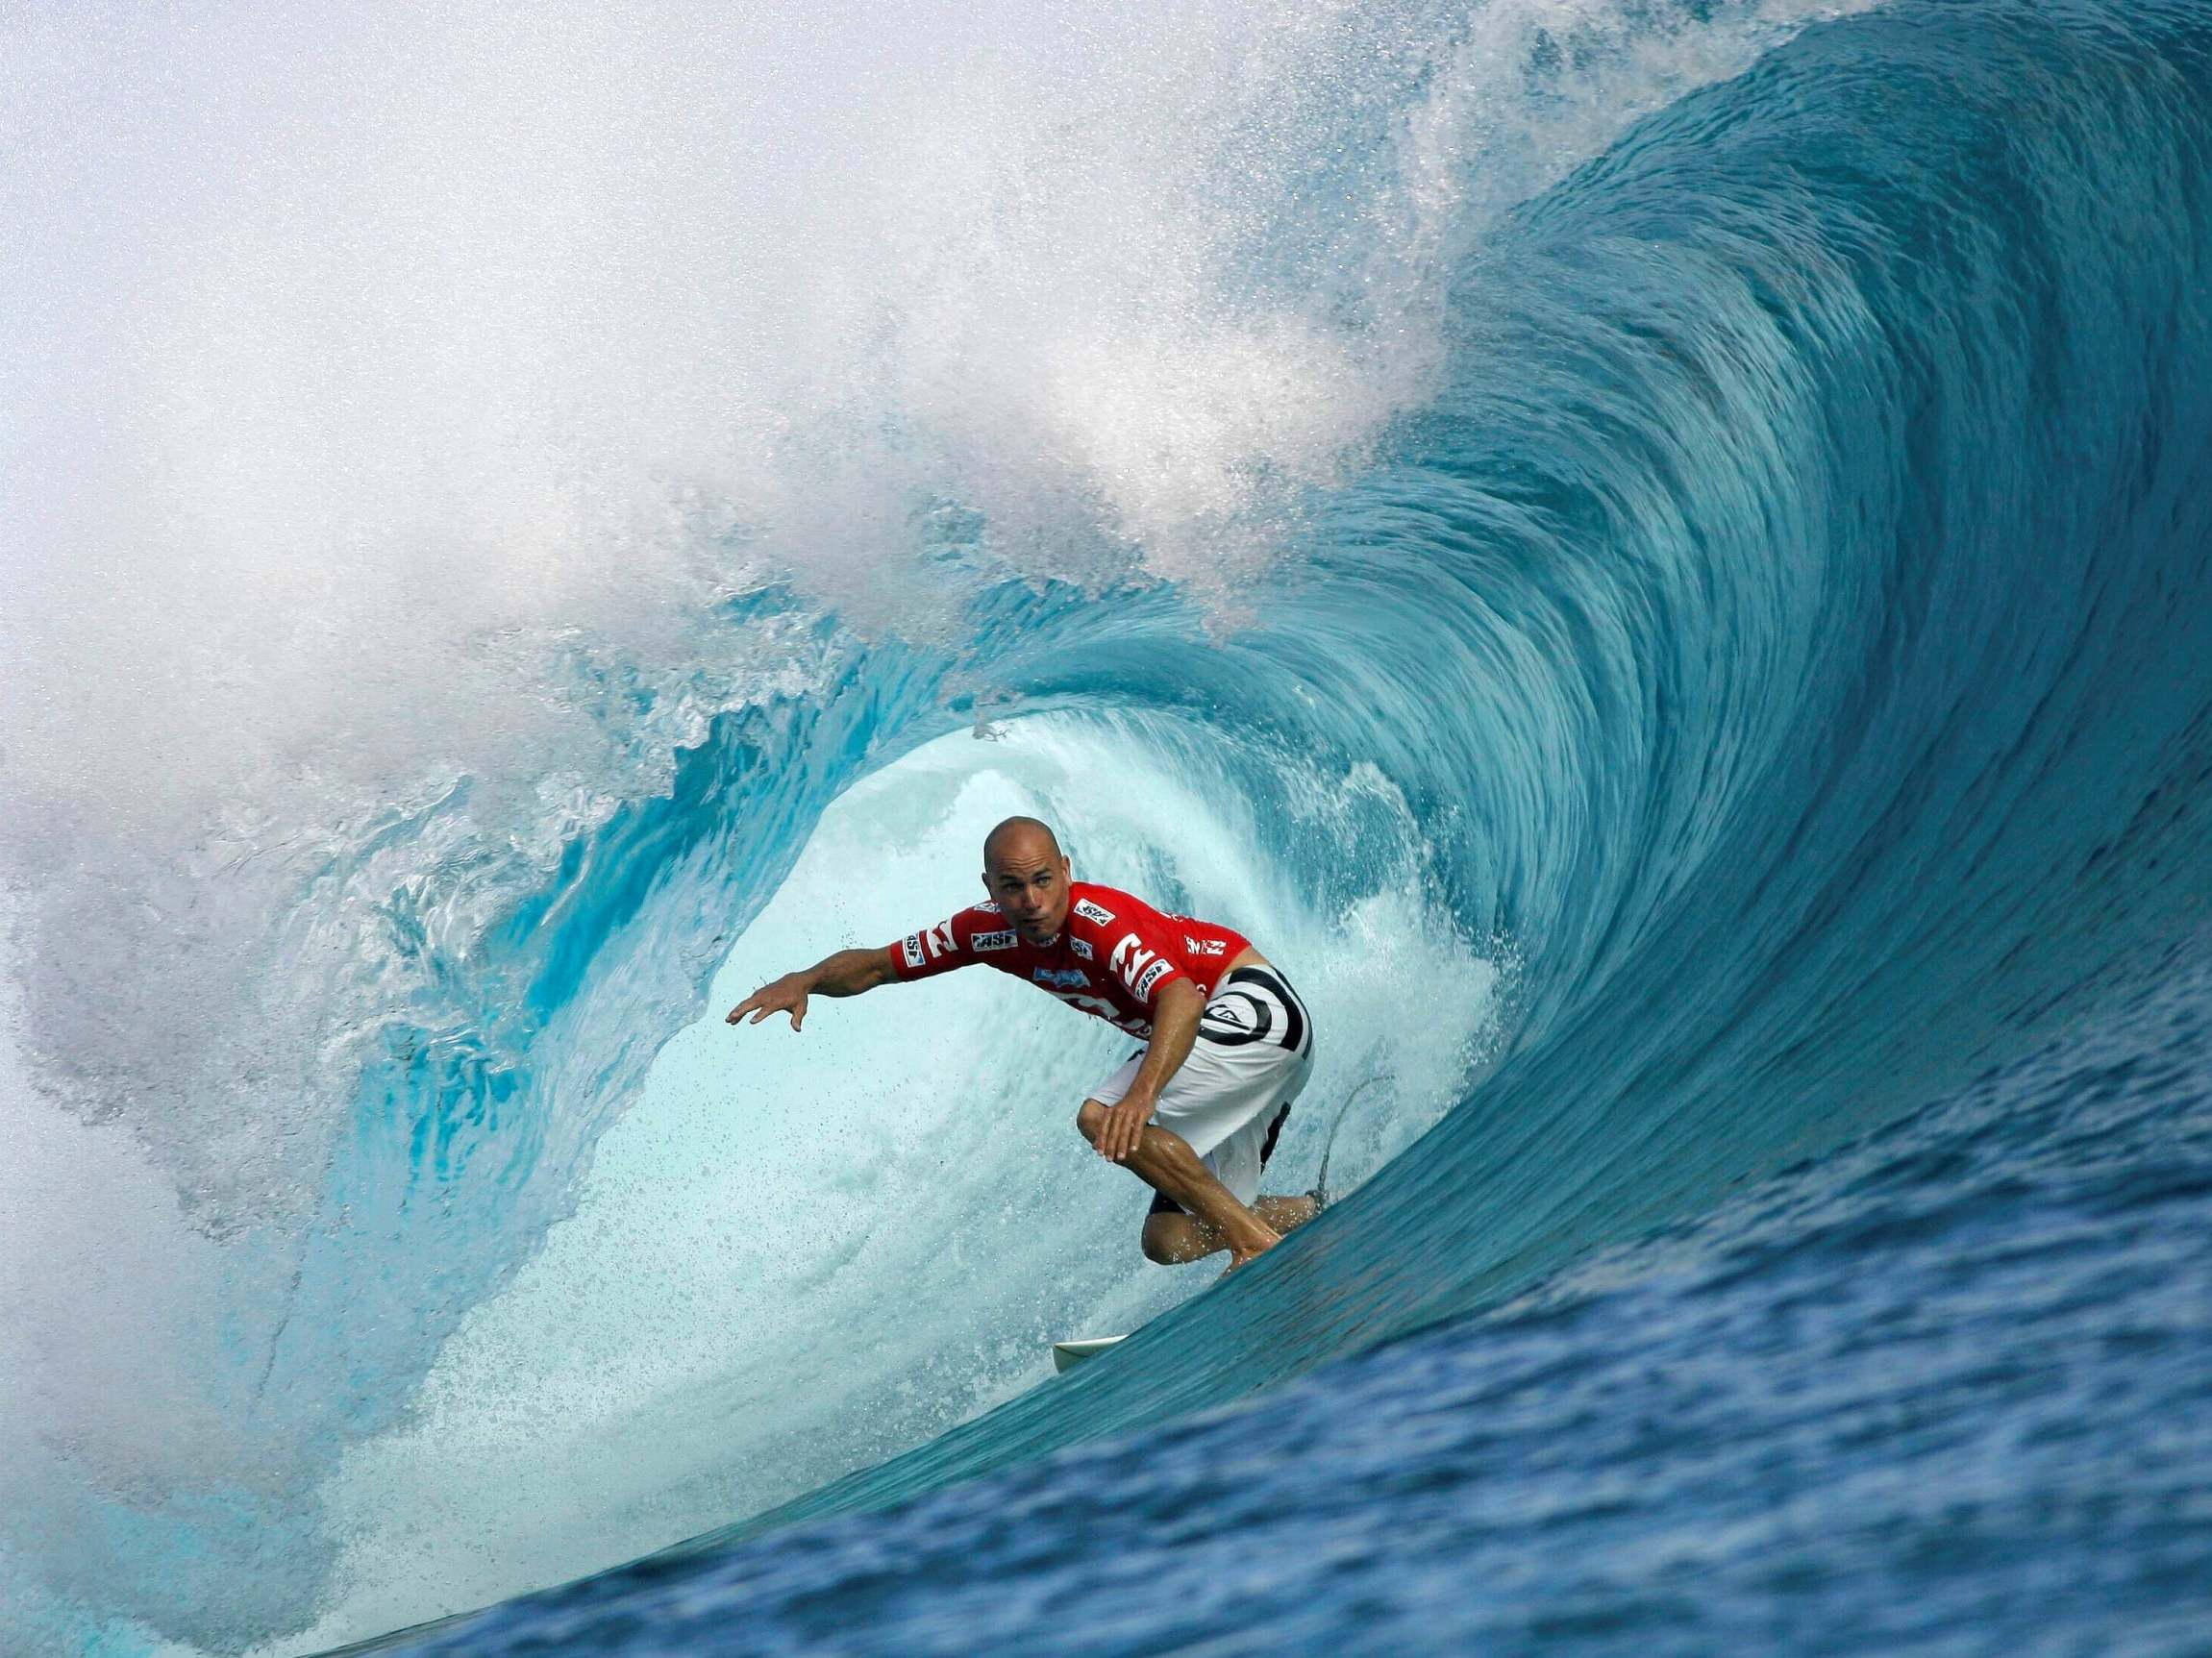 Paris 2024 Olympics surfing to be held in Tahiti 10,000 miles away from